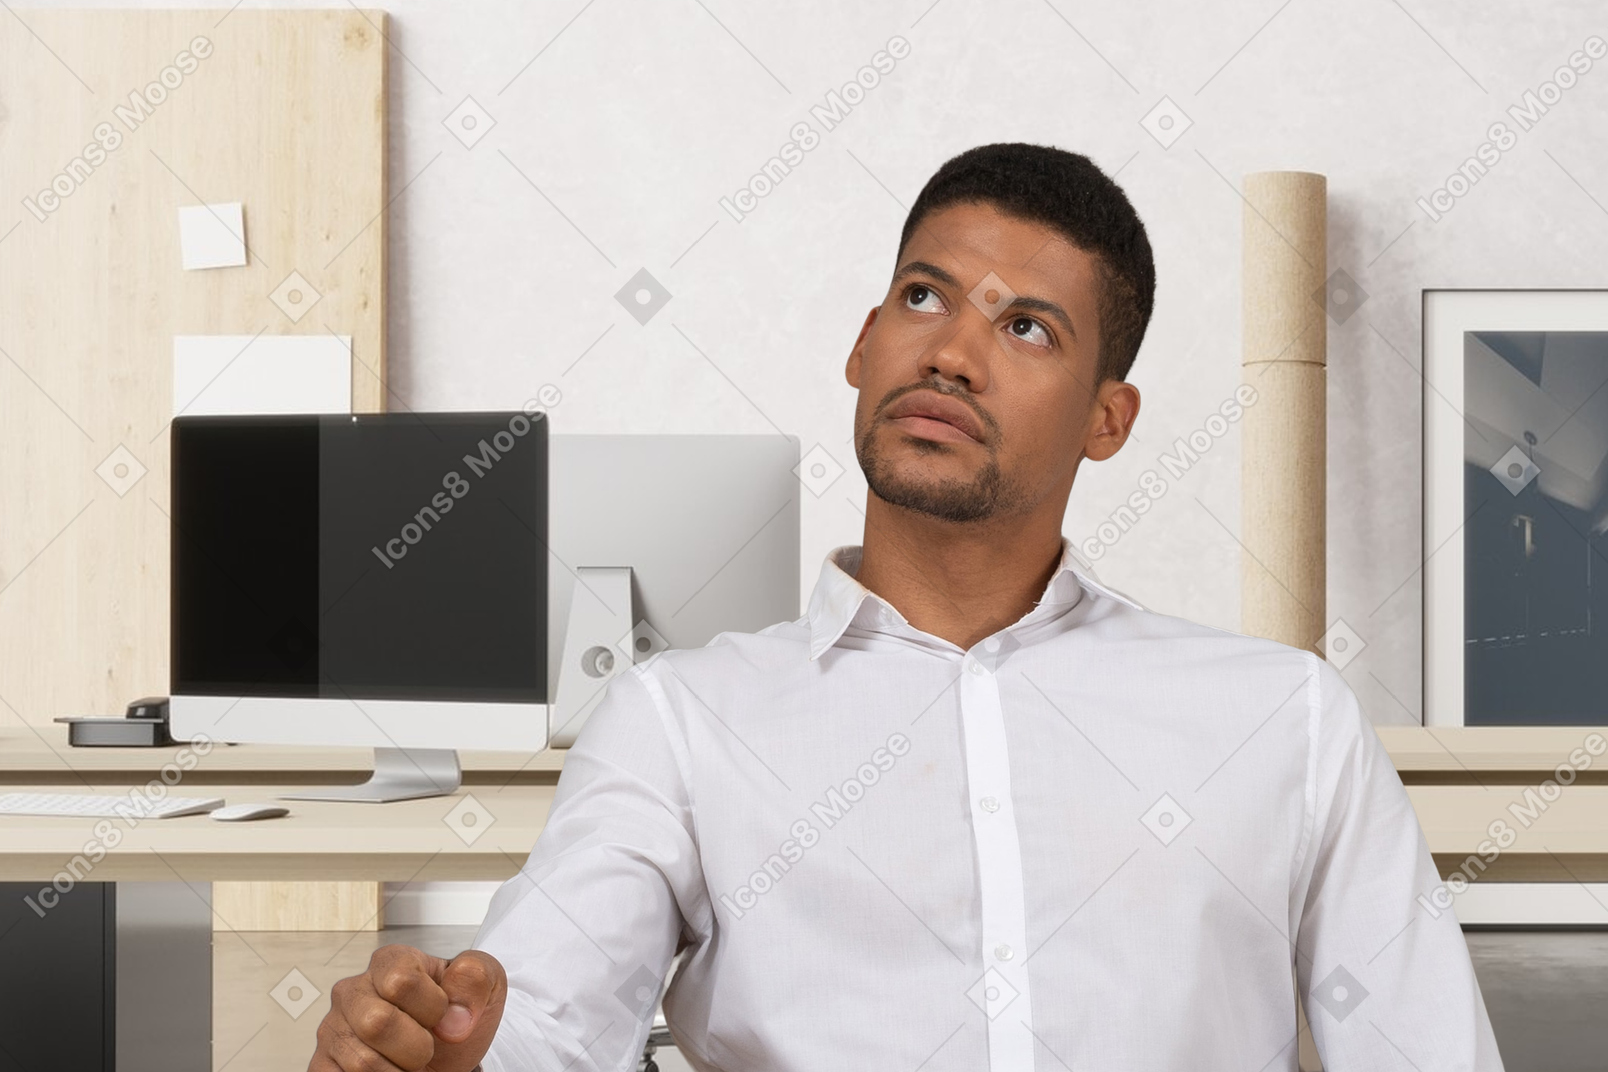 A thoughtful man sitting in the office